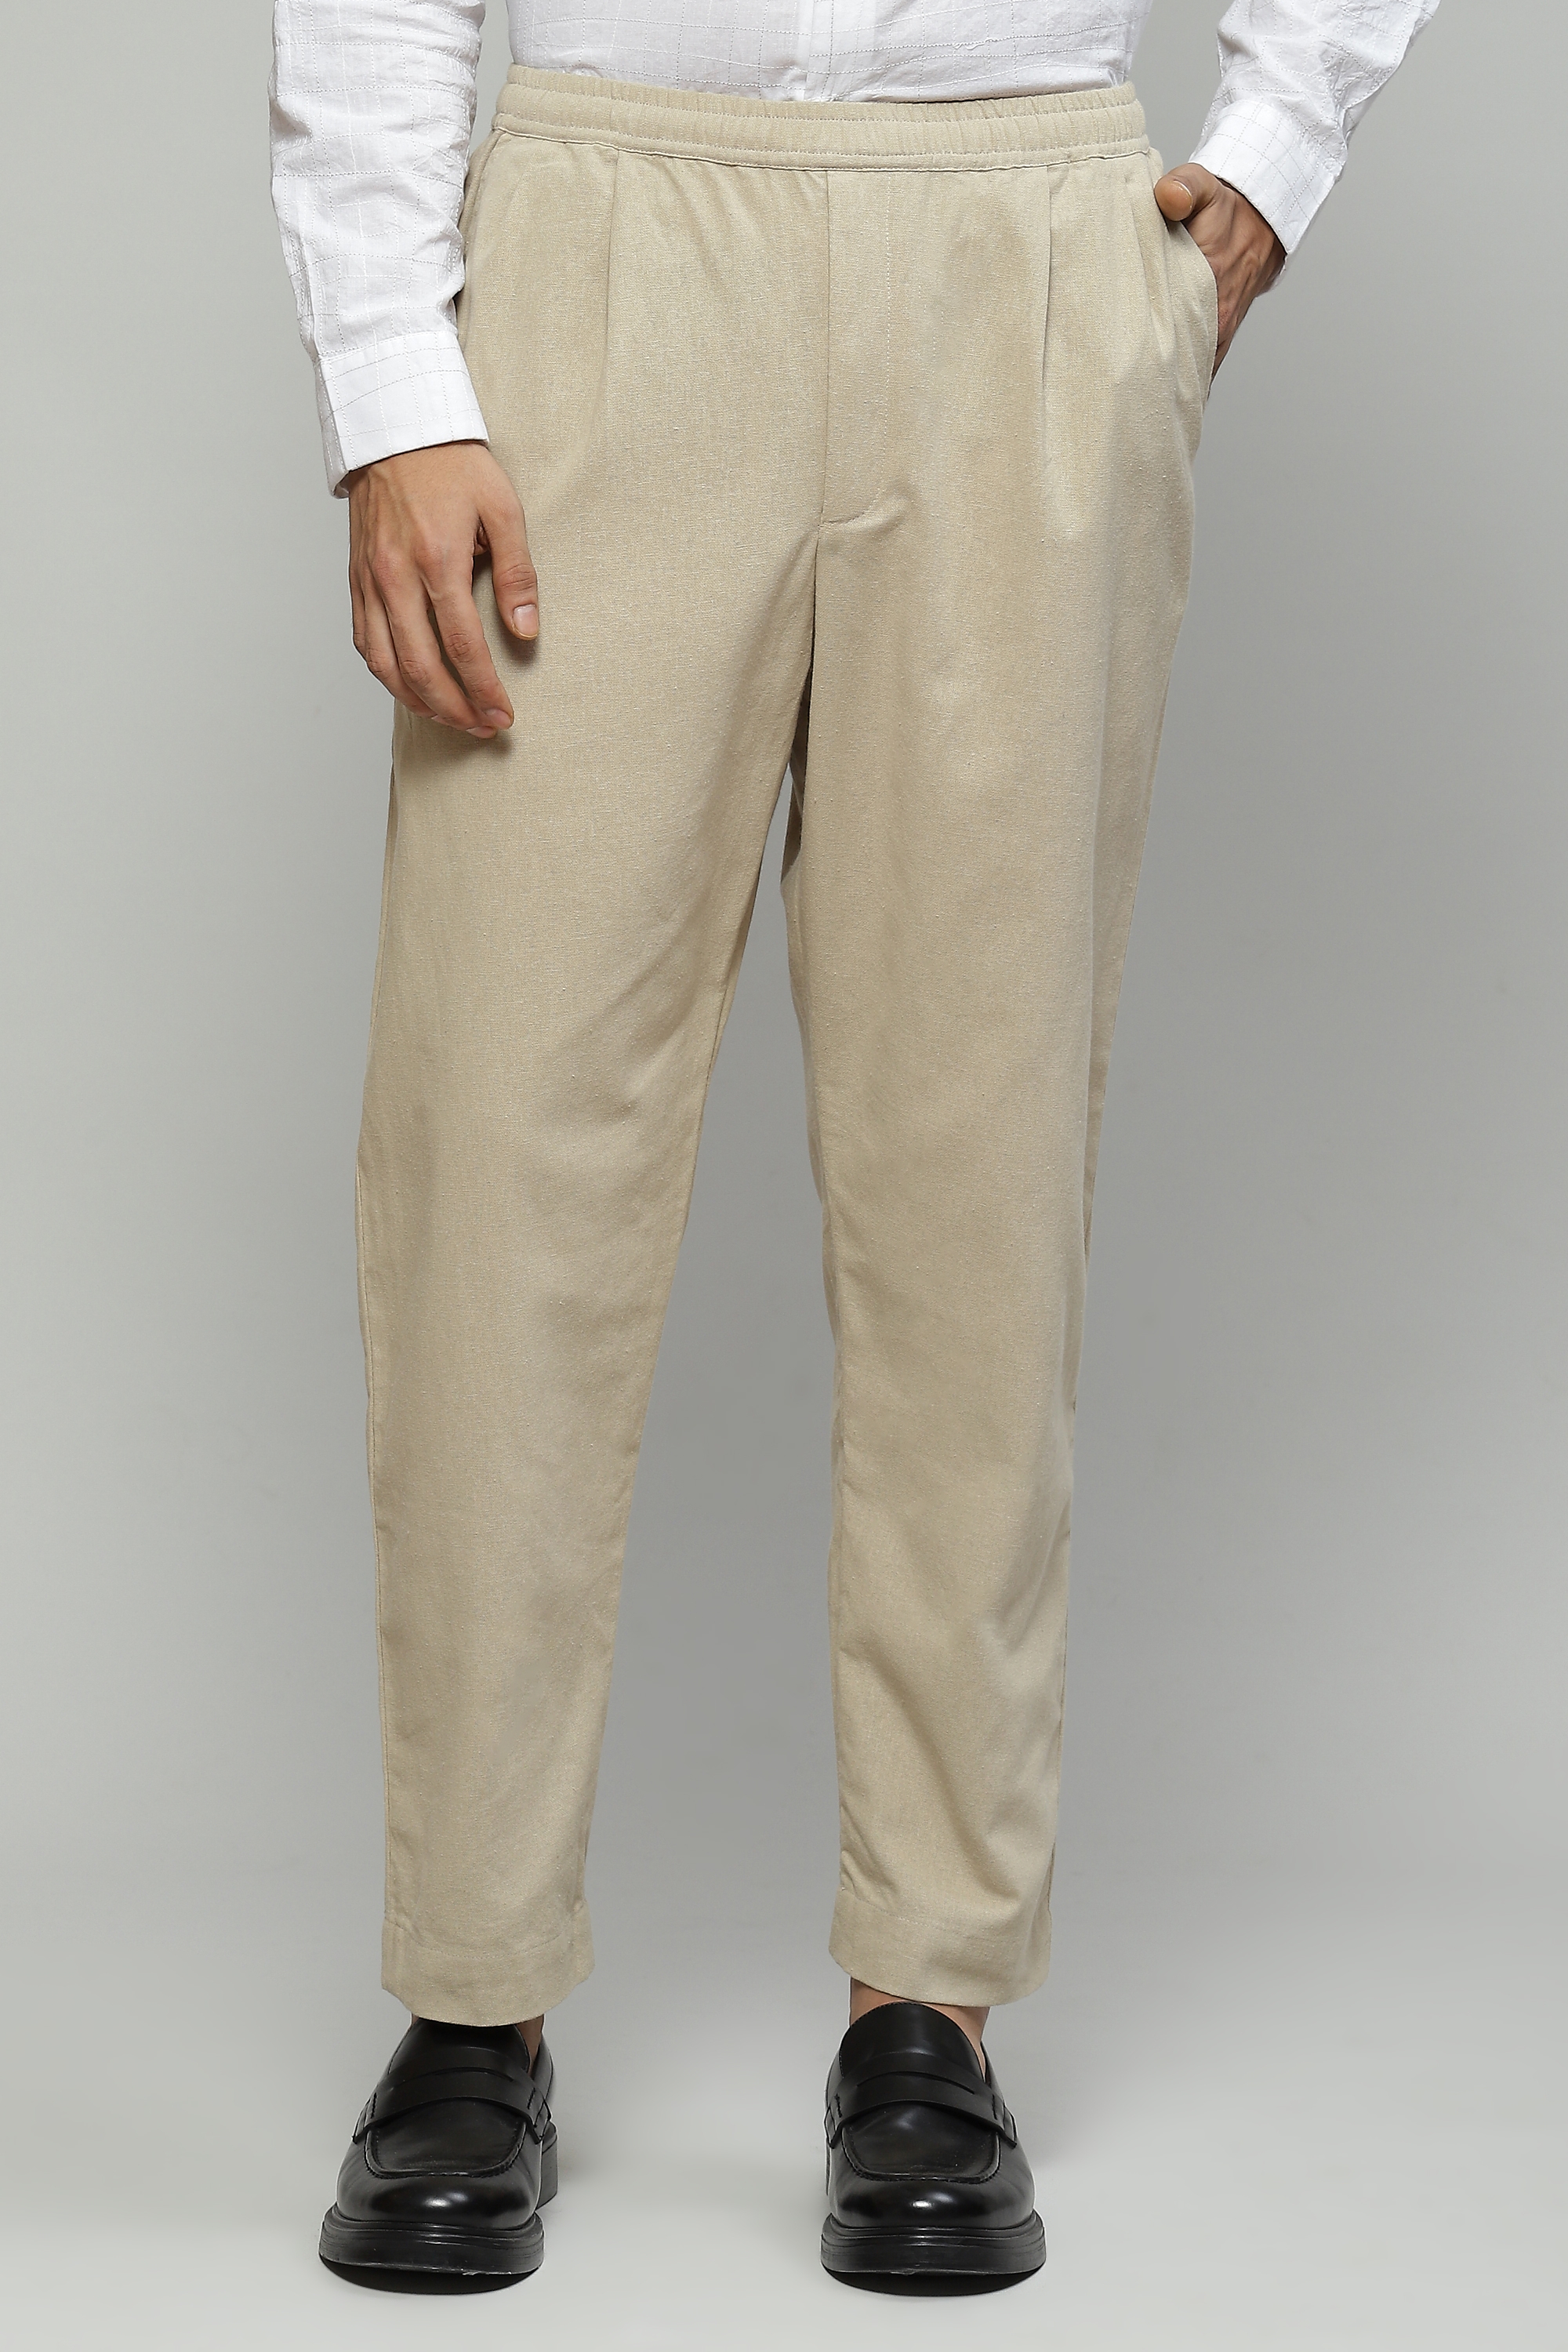 ABRAHAM AND THAKORE | Beige Cotton Pants